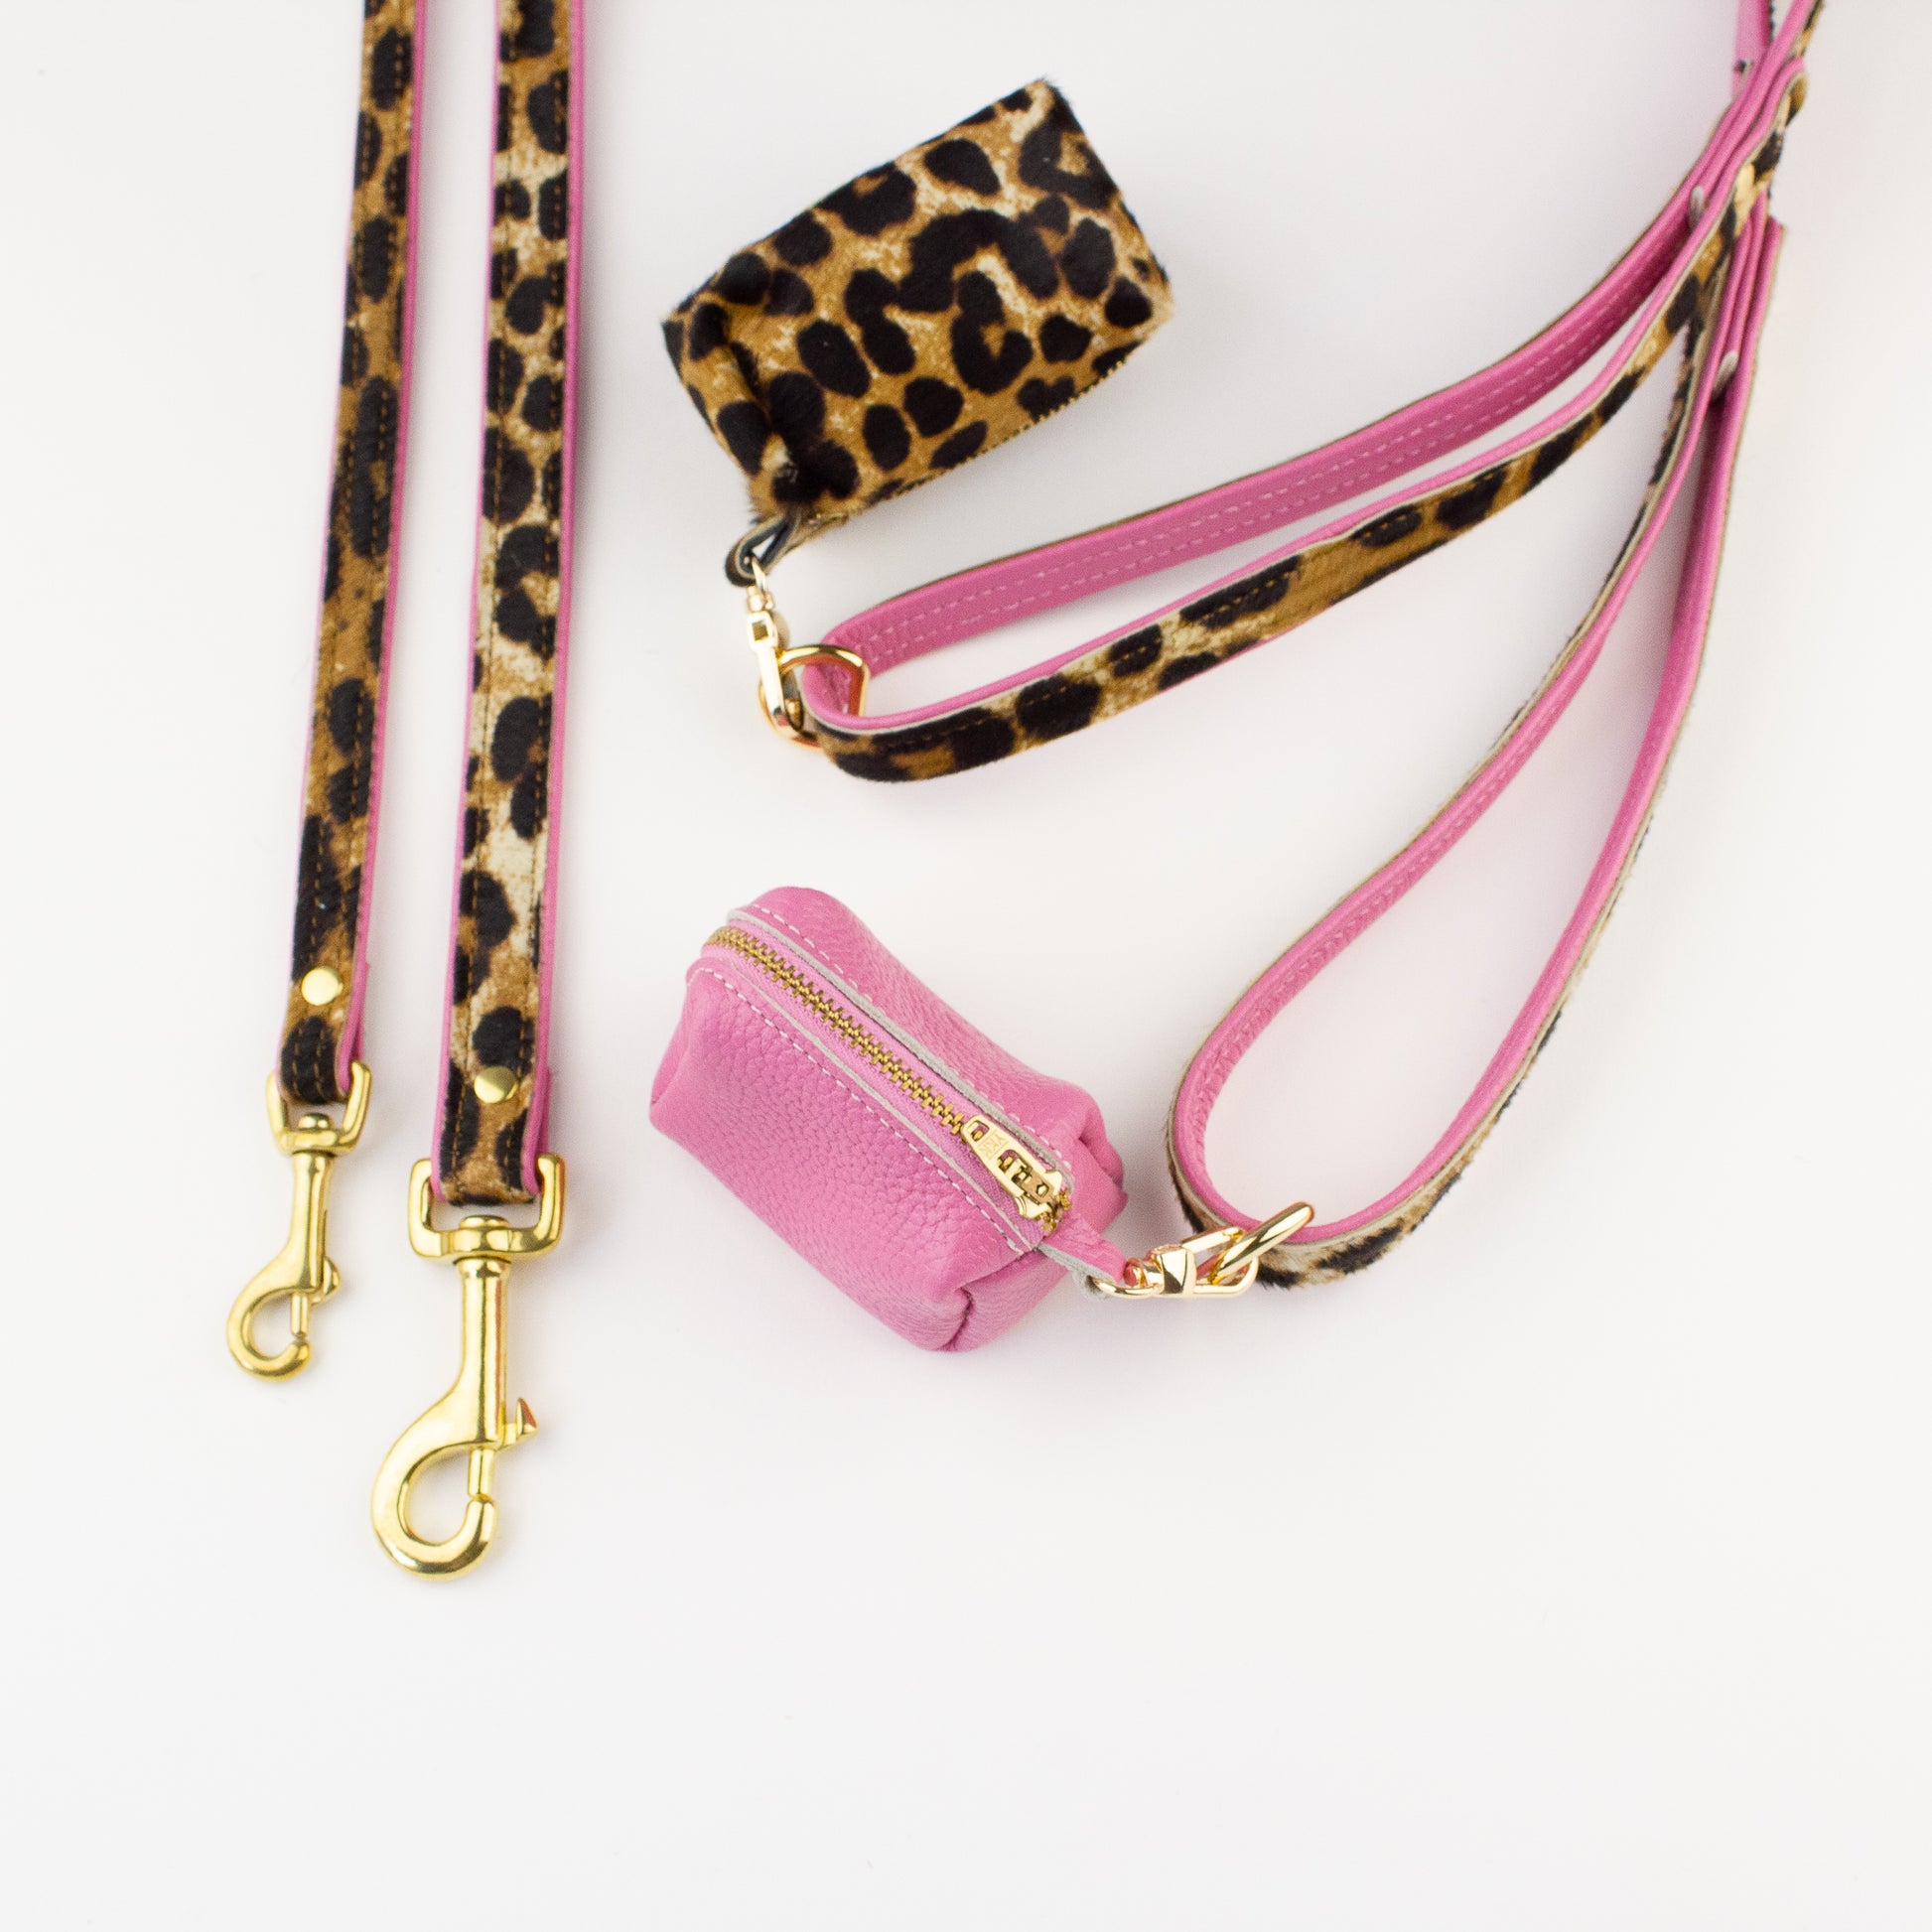 Leopard leather dog accessories Willow Walks